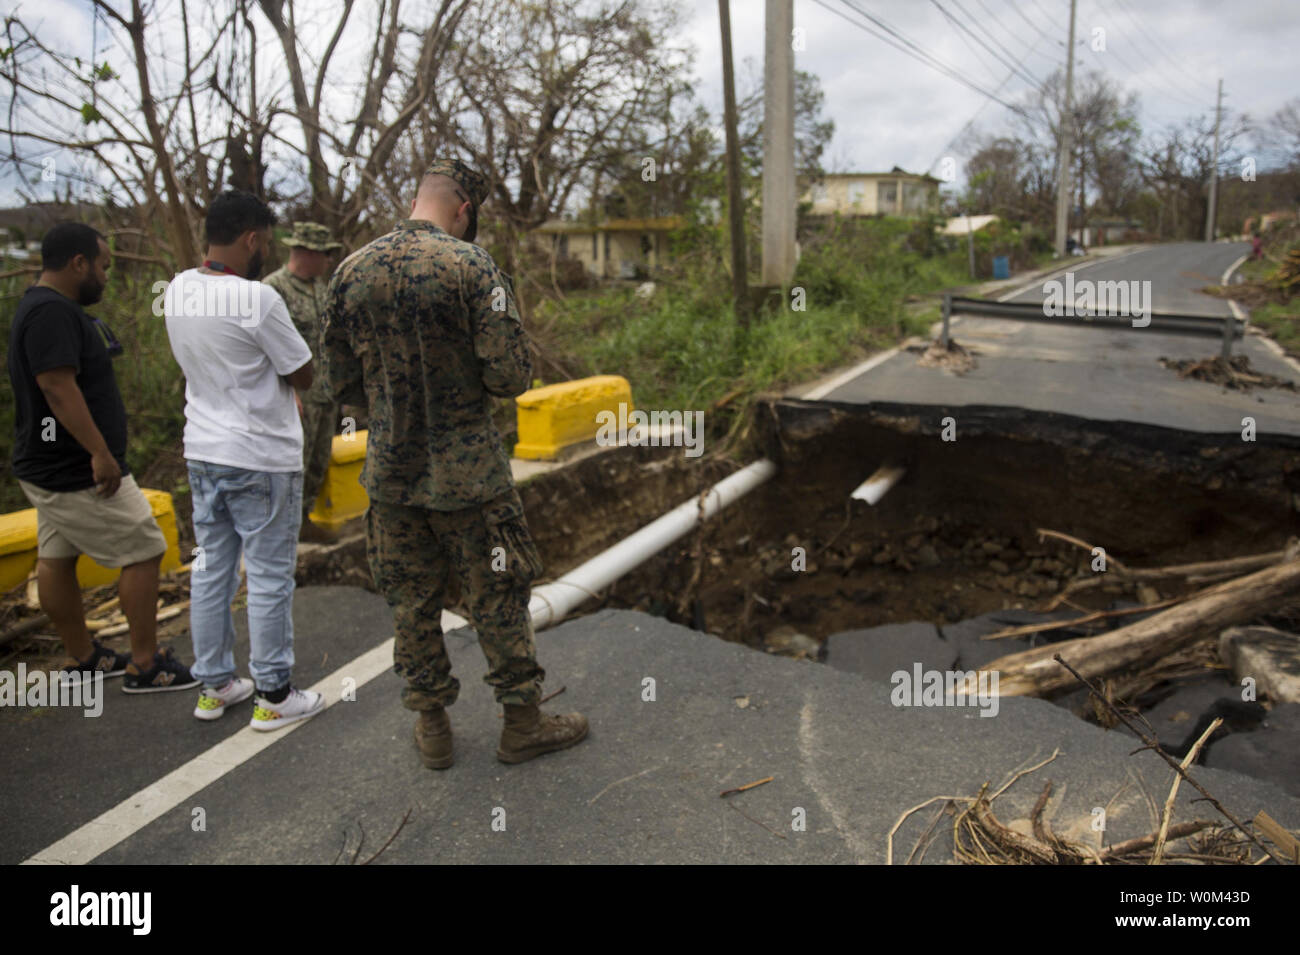 U.S. Marine Corps 1st Lt. Andrew Veal, an infantry officer with Battalion Landing Team 2nd Battalion, 6th Marine Regiment, 26th Marine Expeditionary Unit (MEU) talks to local residents regarding a damaged road caused by flooding in Ceiba, Puerto Rico, on October 2, 2017. The 26th MEU is supporting Federal Emergency Management Agency, the lead federal agency, in helping those affected by Hurricane Maria to minimize suffering and is one component of the overall whole-of-government response effort. Photo by Cpl. Juan Soto-Delgado/USMC/UPI Stock Photo